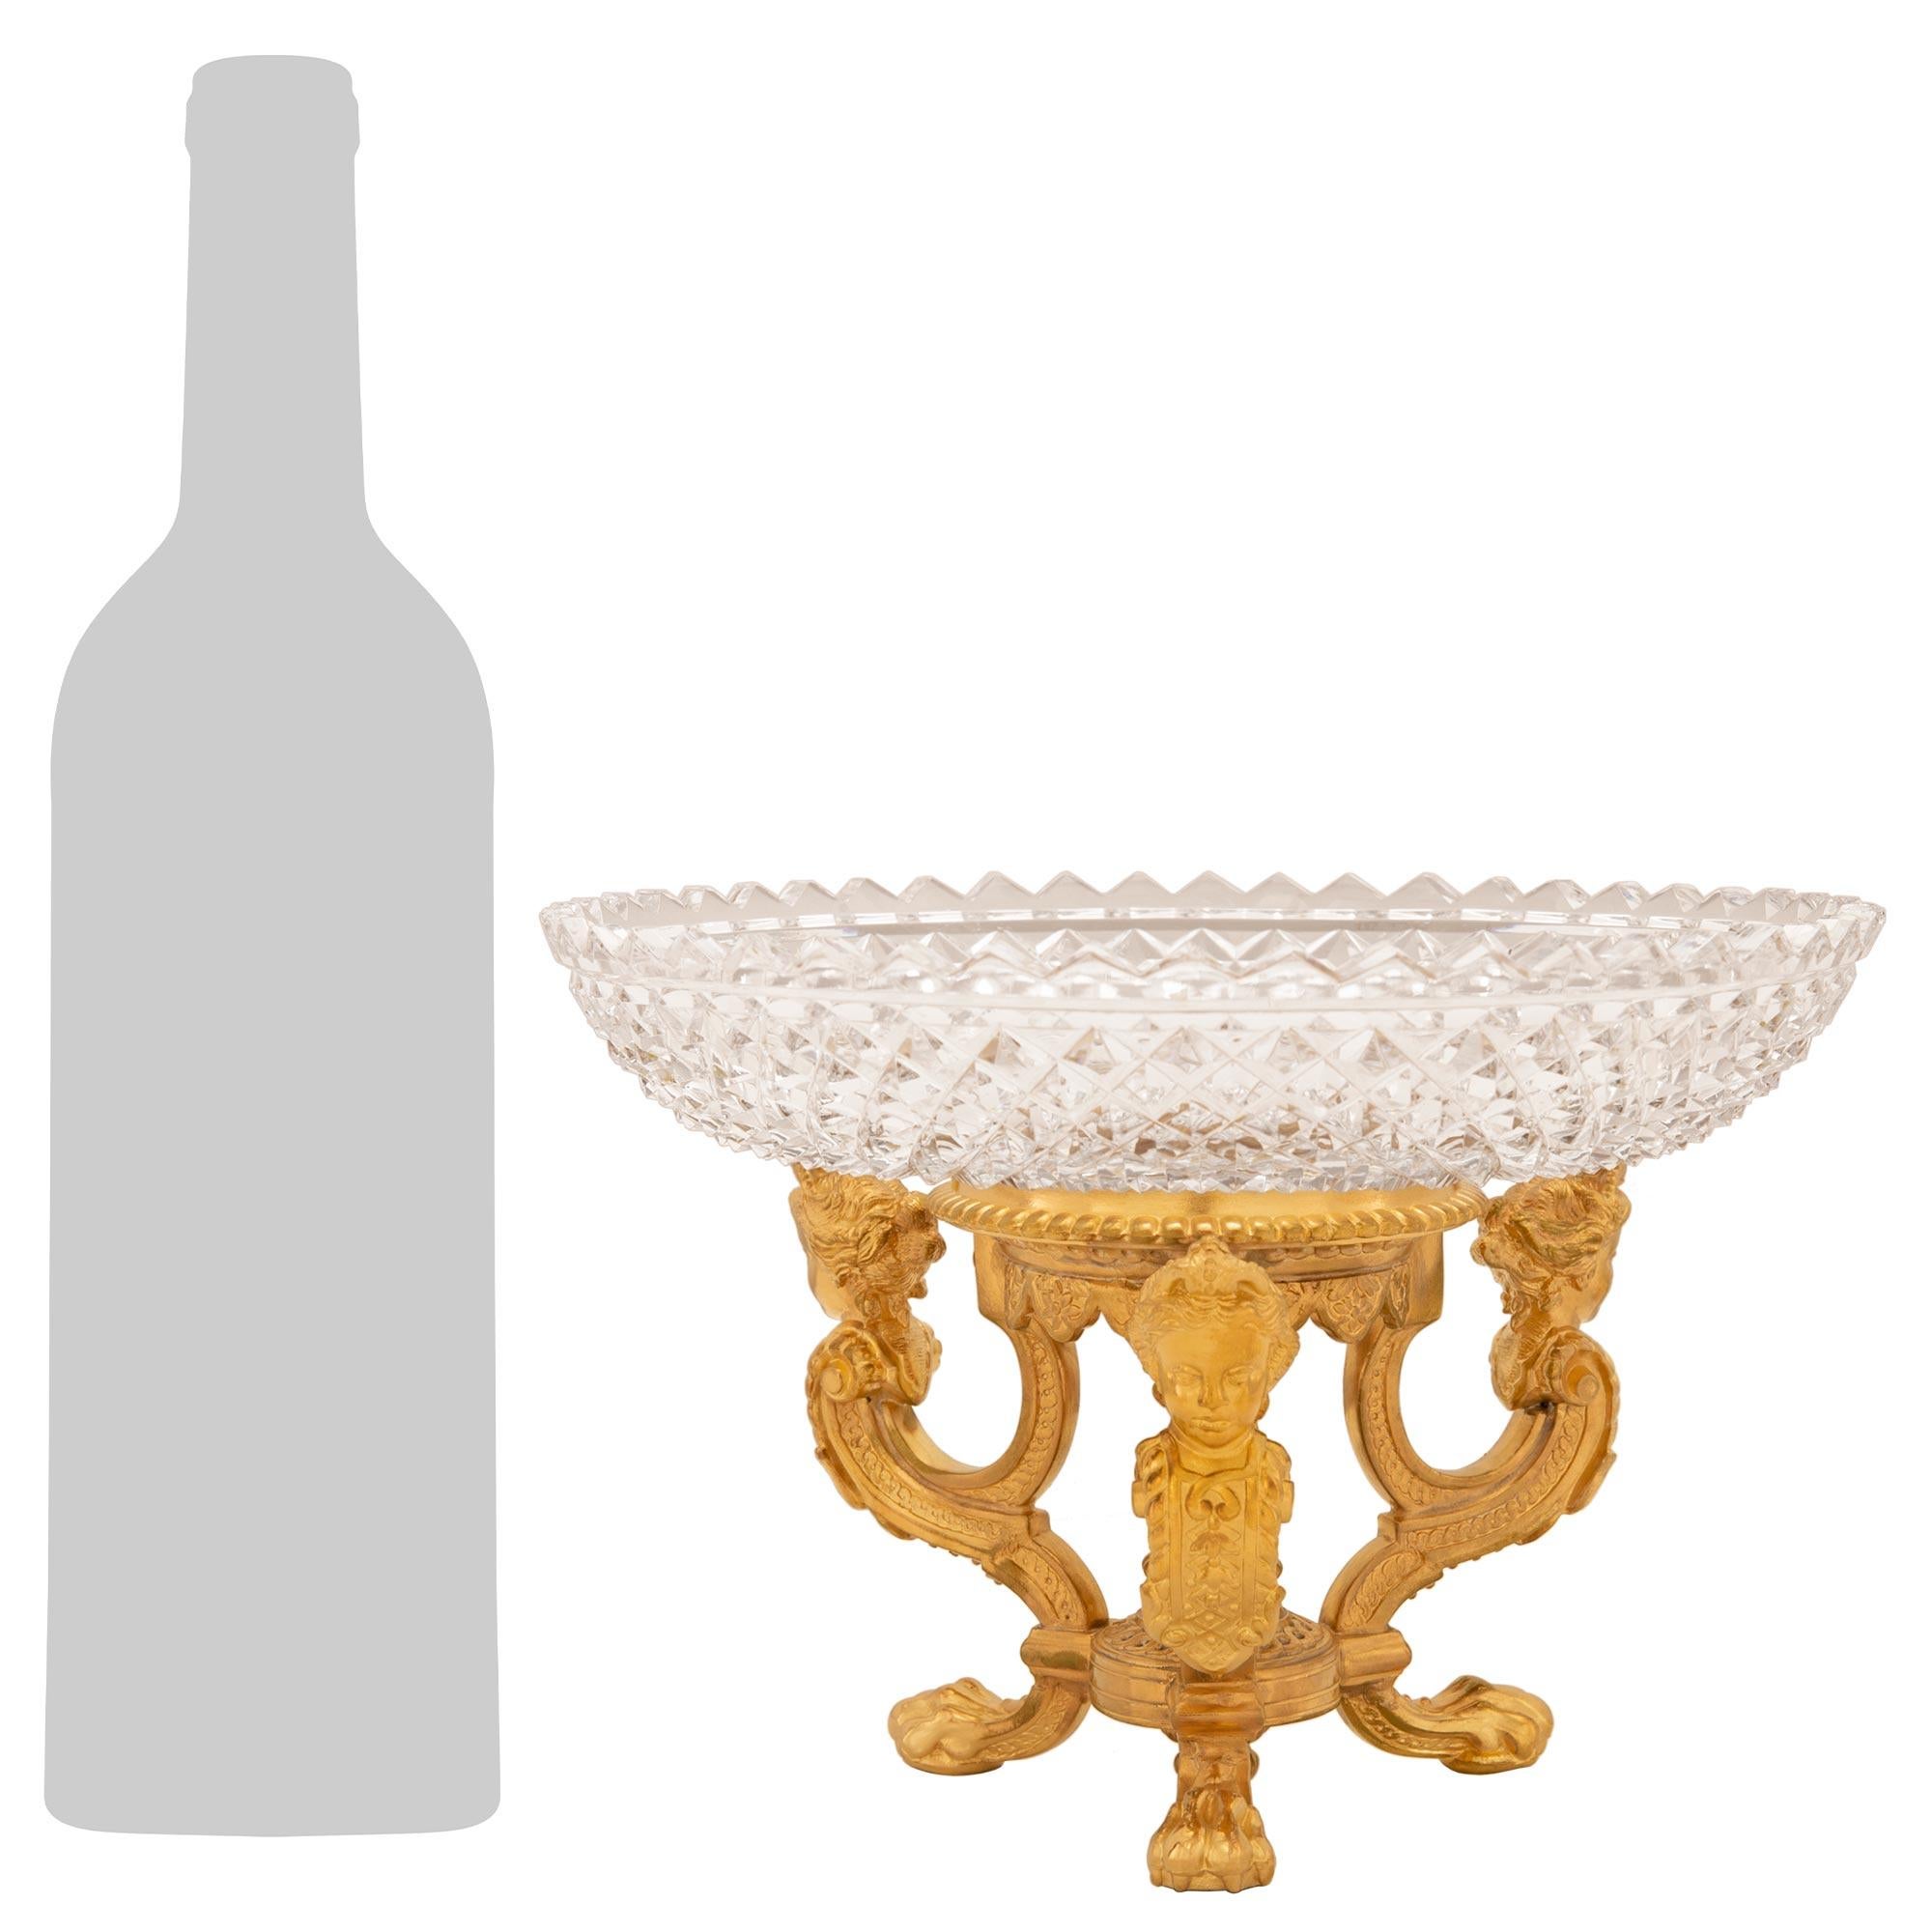 A striking and most elegant pair of French 19th century Louis XVI st. ormolu and Baccarat crystal centerpieces. Each centerpiece is raised by three beautifully scrolled supports with handsome paw feet and lovely interlocking geometric bands leading